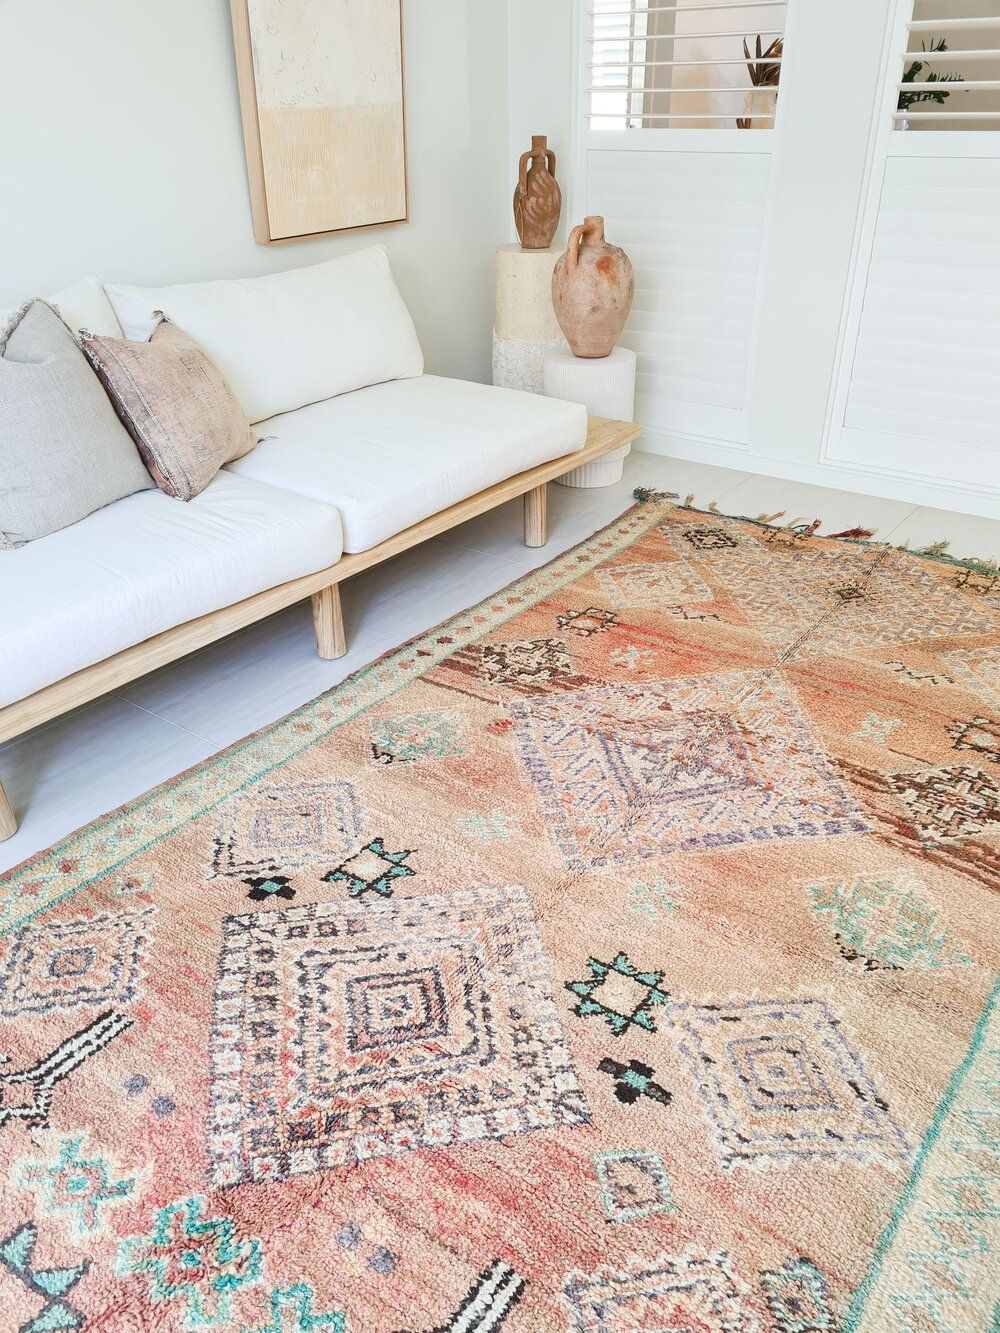 Enthnic style: moroccan rugs